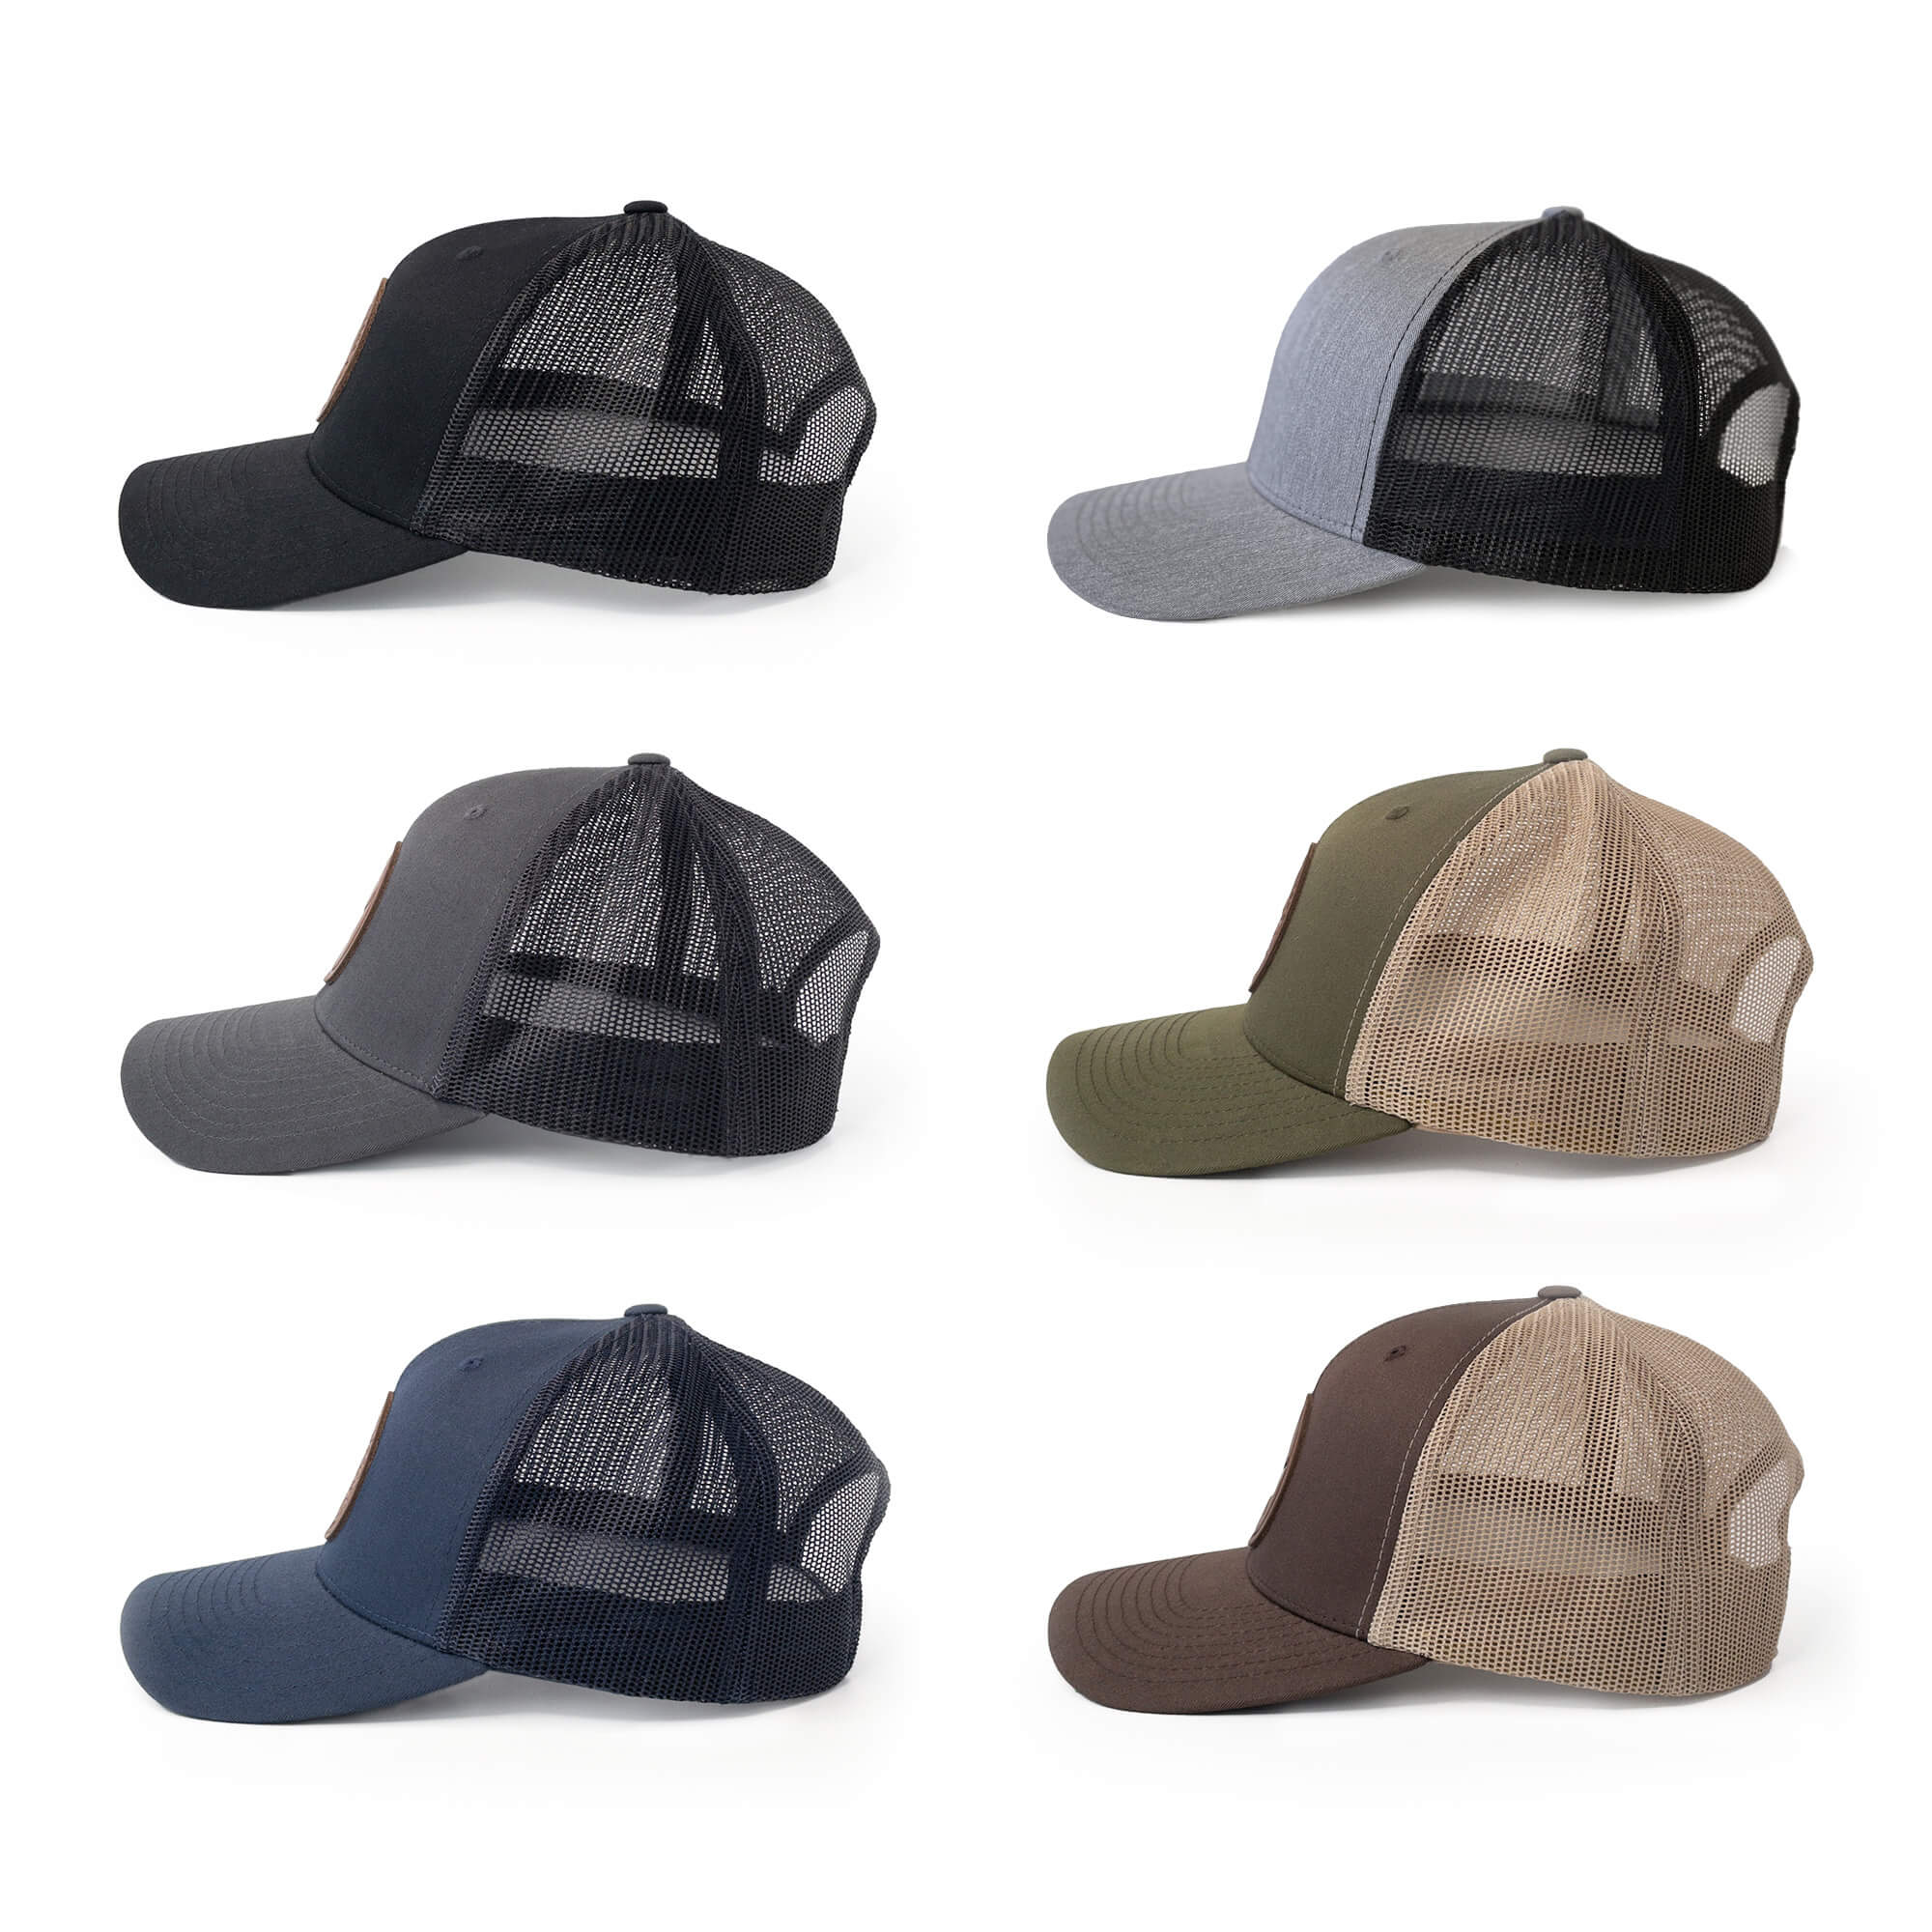 Leather patch trucker hats available in 6 colors | BLACK-002-011, CHARC-002-011, NAVY-002-011, HGREY-002-011, MOSS-002-011, BROWN-002-011